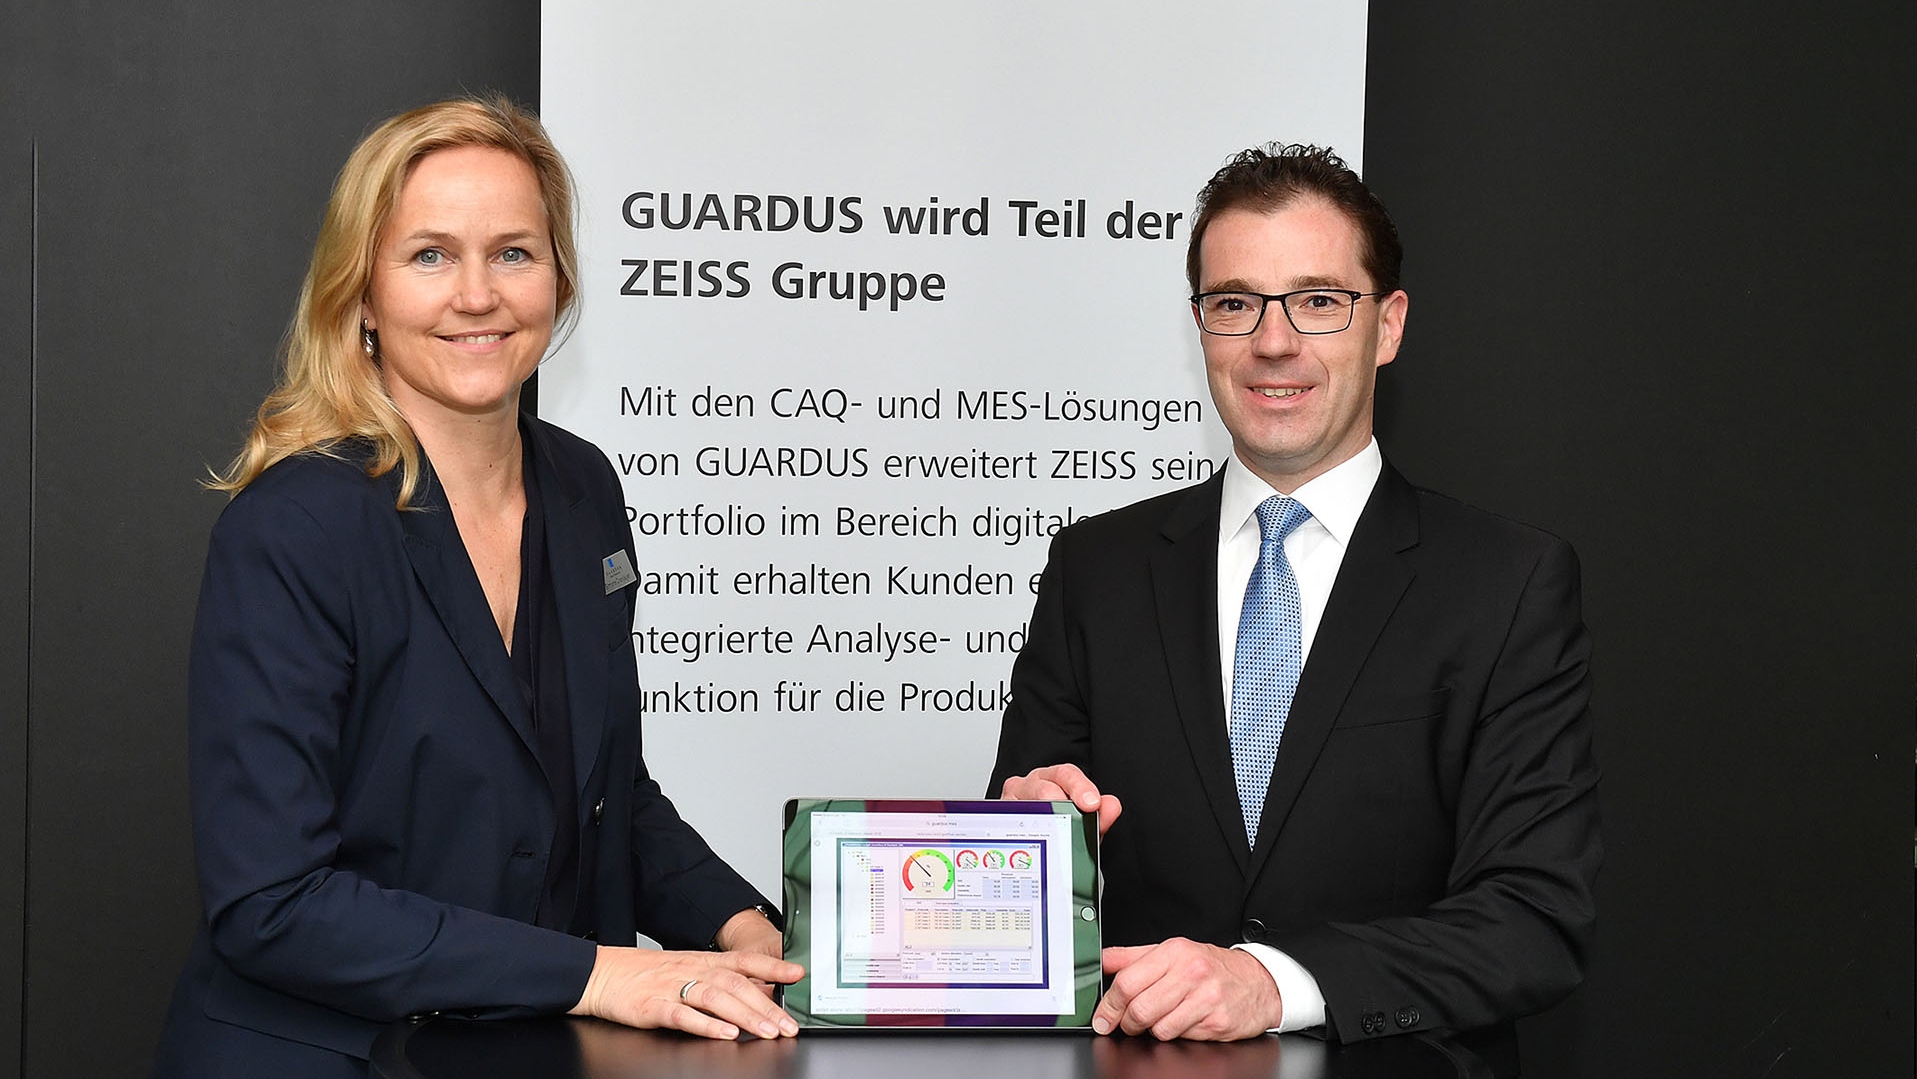 Simone Cronjäger, Founder and Managing Director of GUARDUS, and Dr. Jochen Peter, Member of the Executive Board of the ZEISS Group and President & CEO of Carl Zeiss Industrielle Messtechnik GmbH, announcing ZEISS' acquistion of GUARDUS